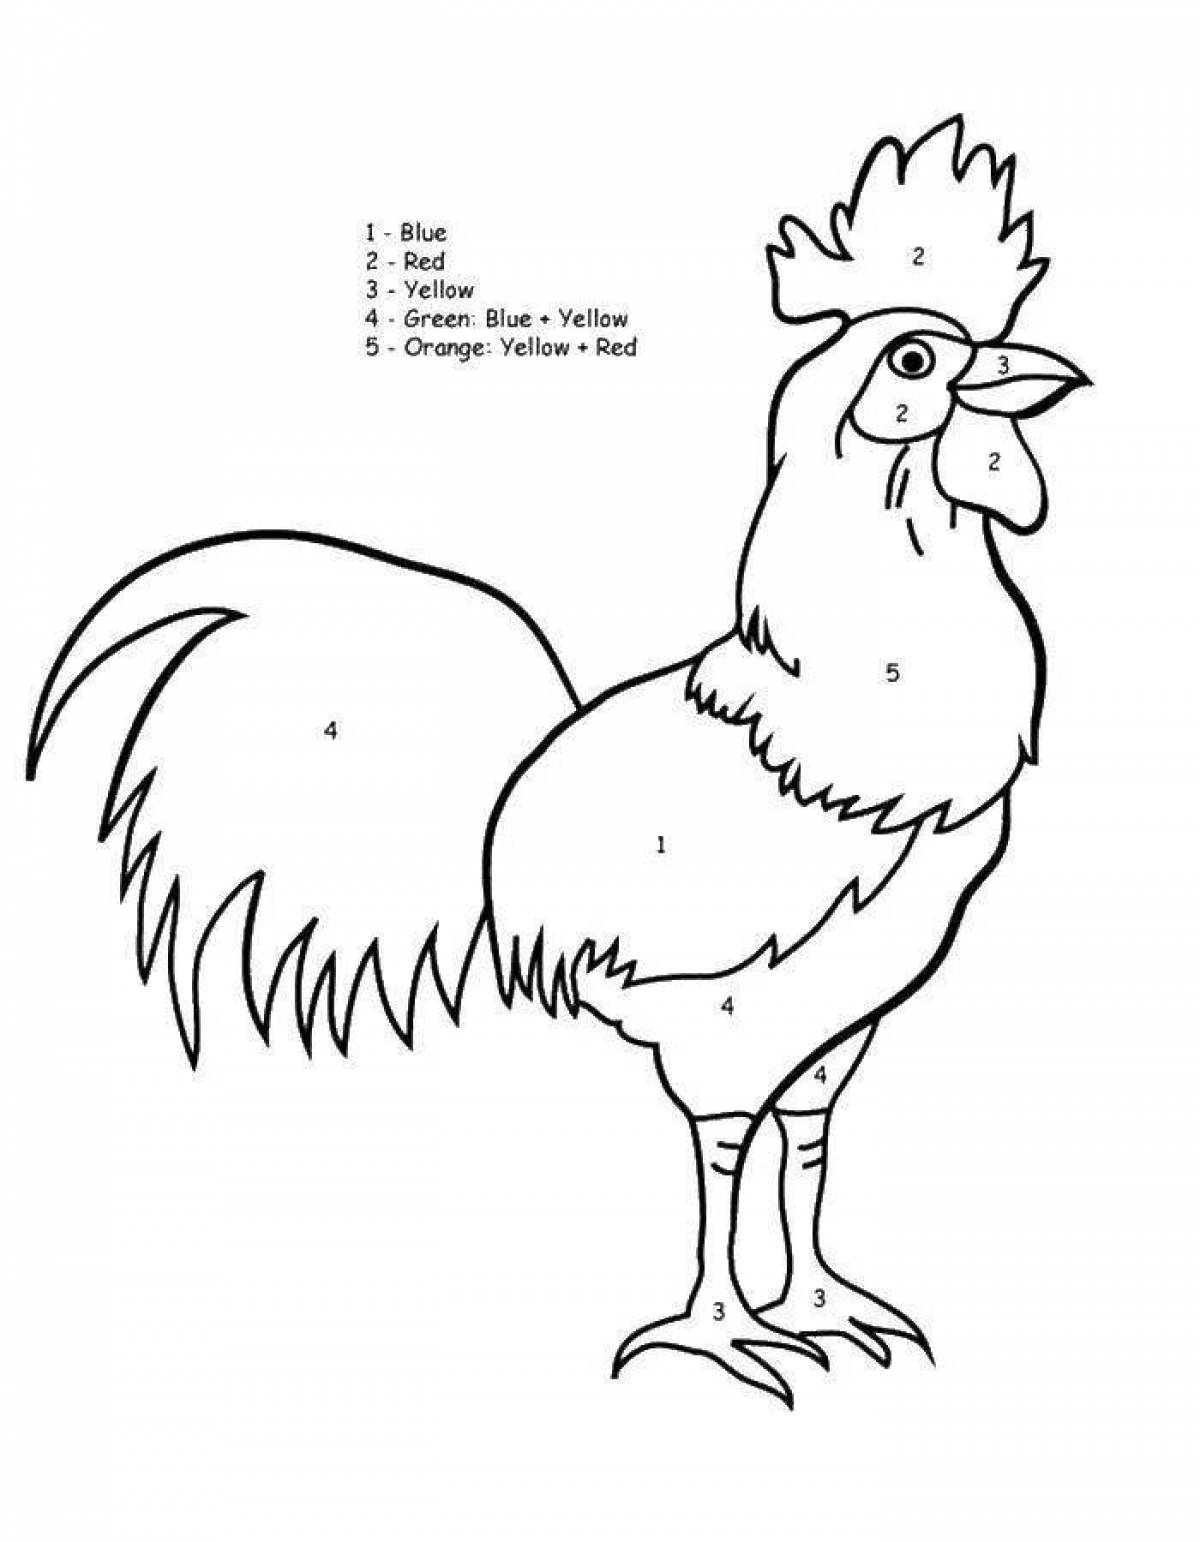 Coloring page of a dazzlingly colored rooster